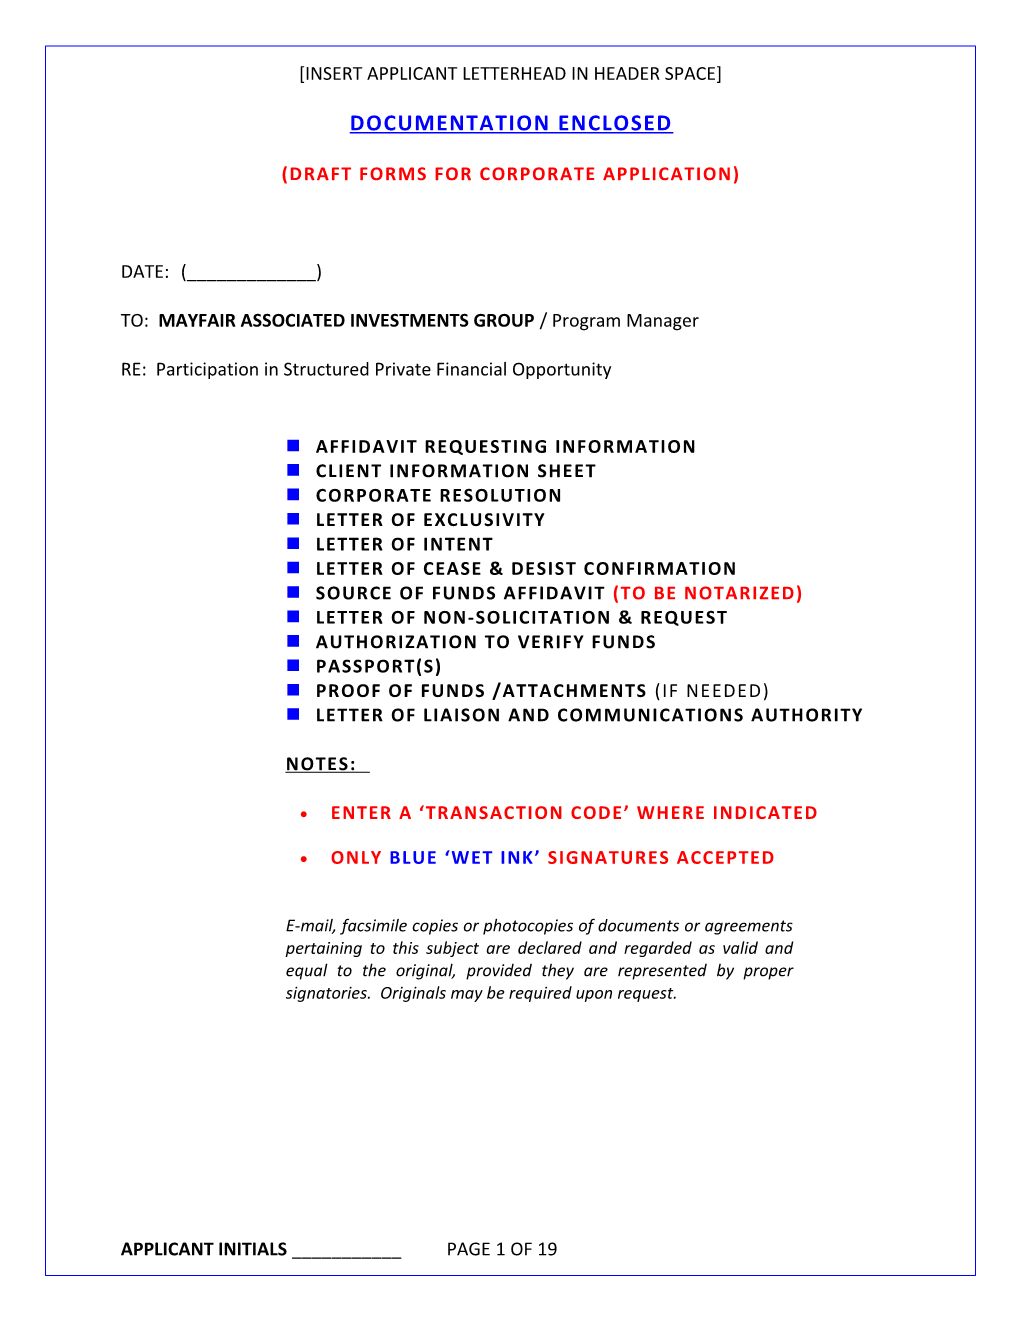 DRAFT Forms for CORPORATE APPLICATION